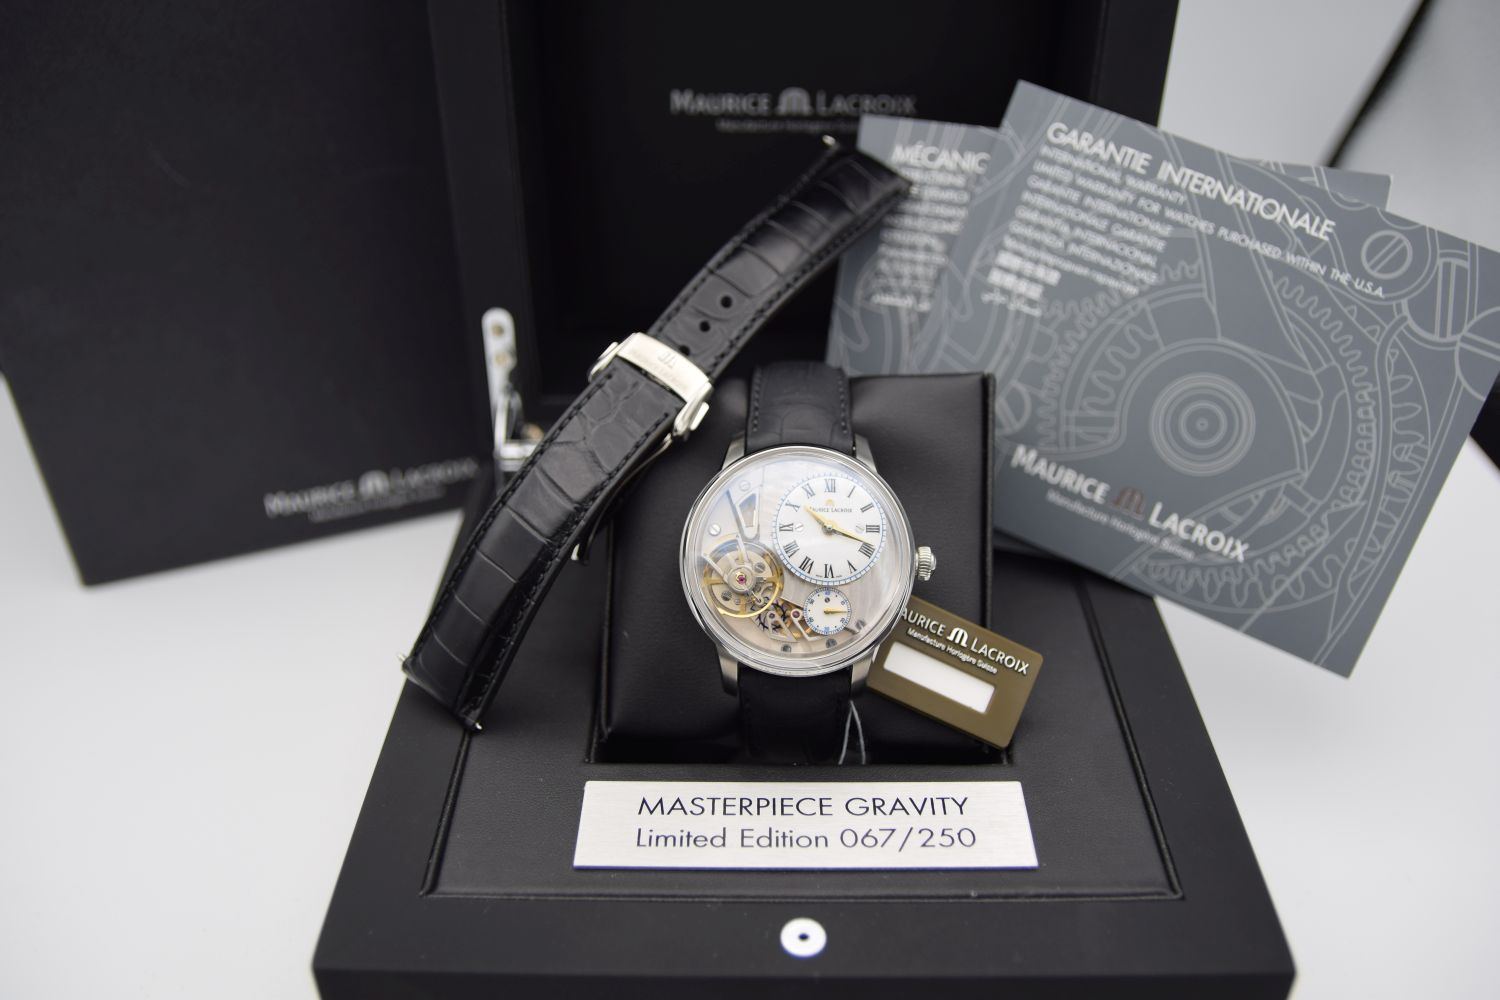 GENTLEMAN'S MAURICE LACROIX MATERPIECE GRAVITY LIMITED EDITION, AUTOMATIC MANUFACTURE ML230, - Image 5 of 8